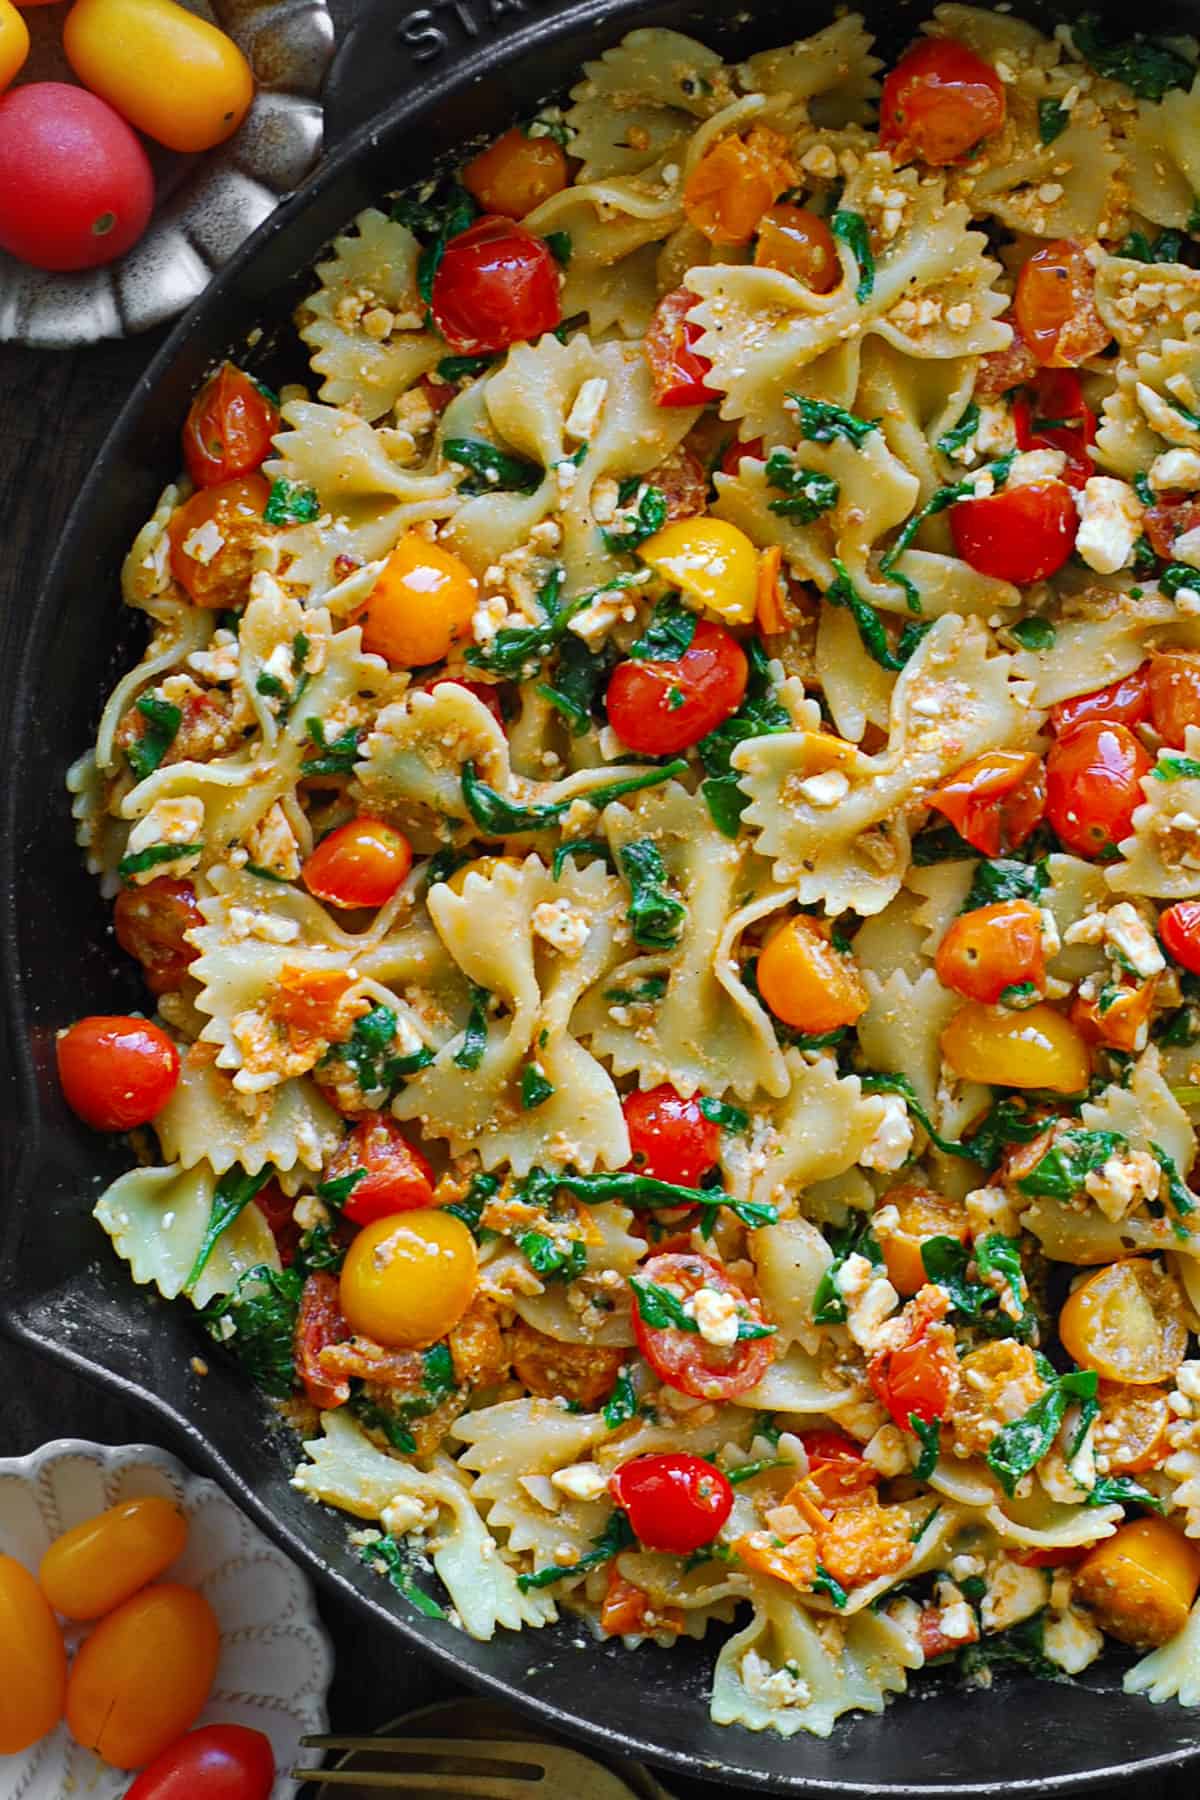 Bow-Tie Pasta with Feta Cheese, Cherry Tomatoes, and Spinach - in a cast iron skillet.